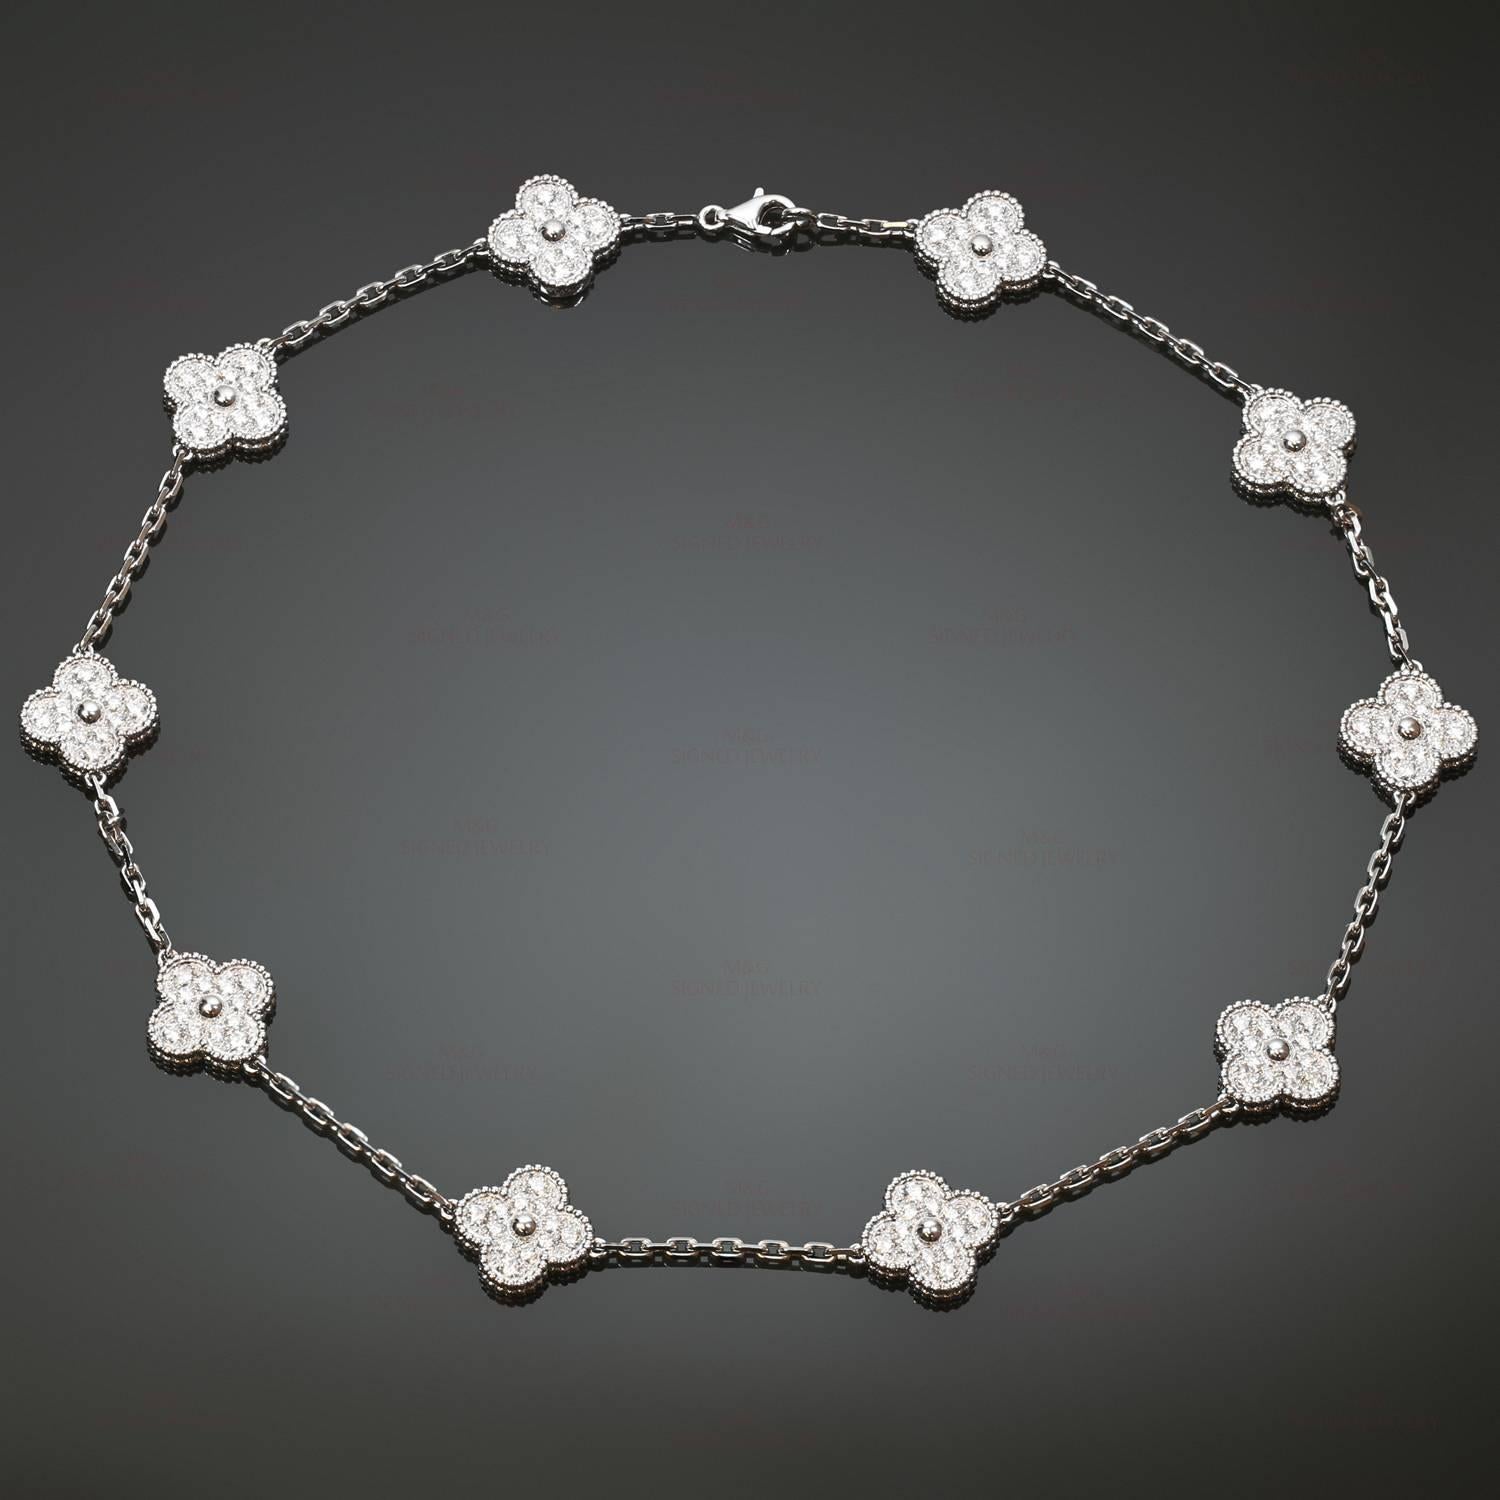 This classic like-new Van Cleef & Arpels necklace from the iconic Vintage Alhambra collection is crafted in 18k white gold and features 10 lucky clover motifs beautifully set with sparkling brilliant-cut round diamonds of an estimated 4.85 carats.